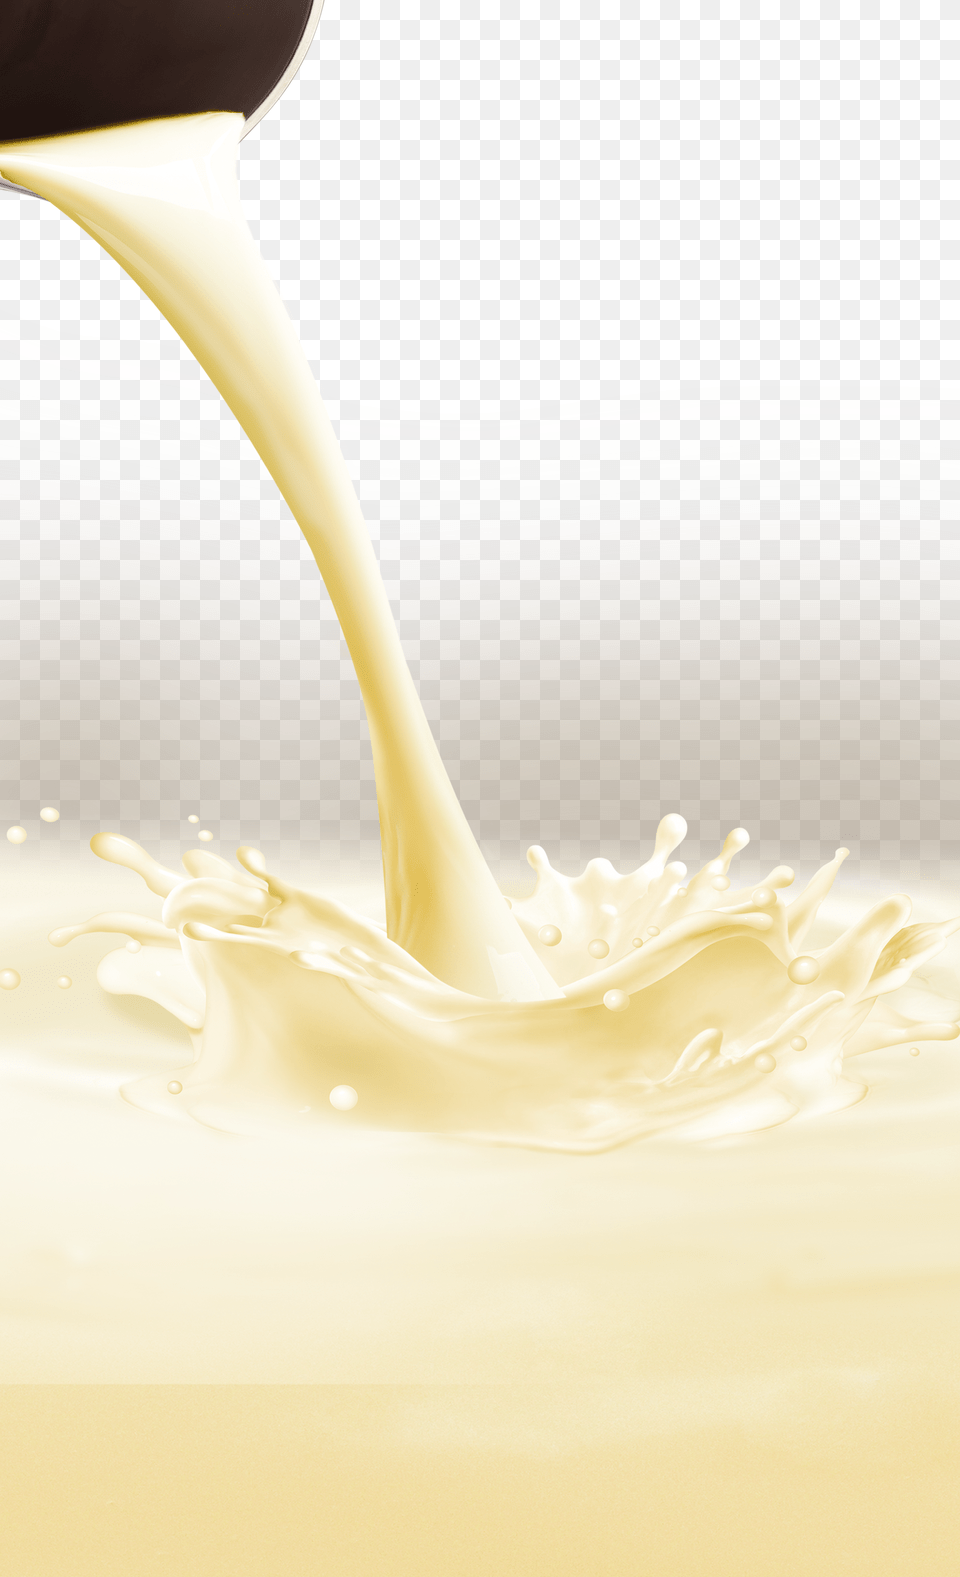 Flavor Of Milk Transprent Dairy Product Png Image